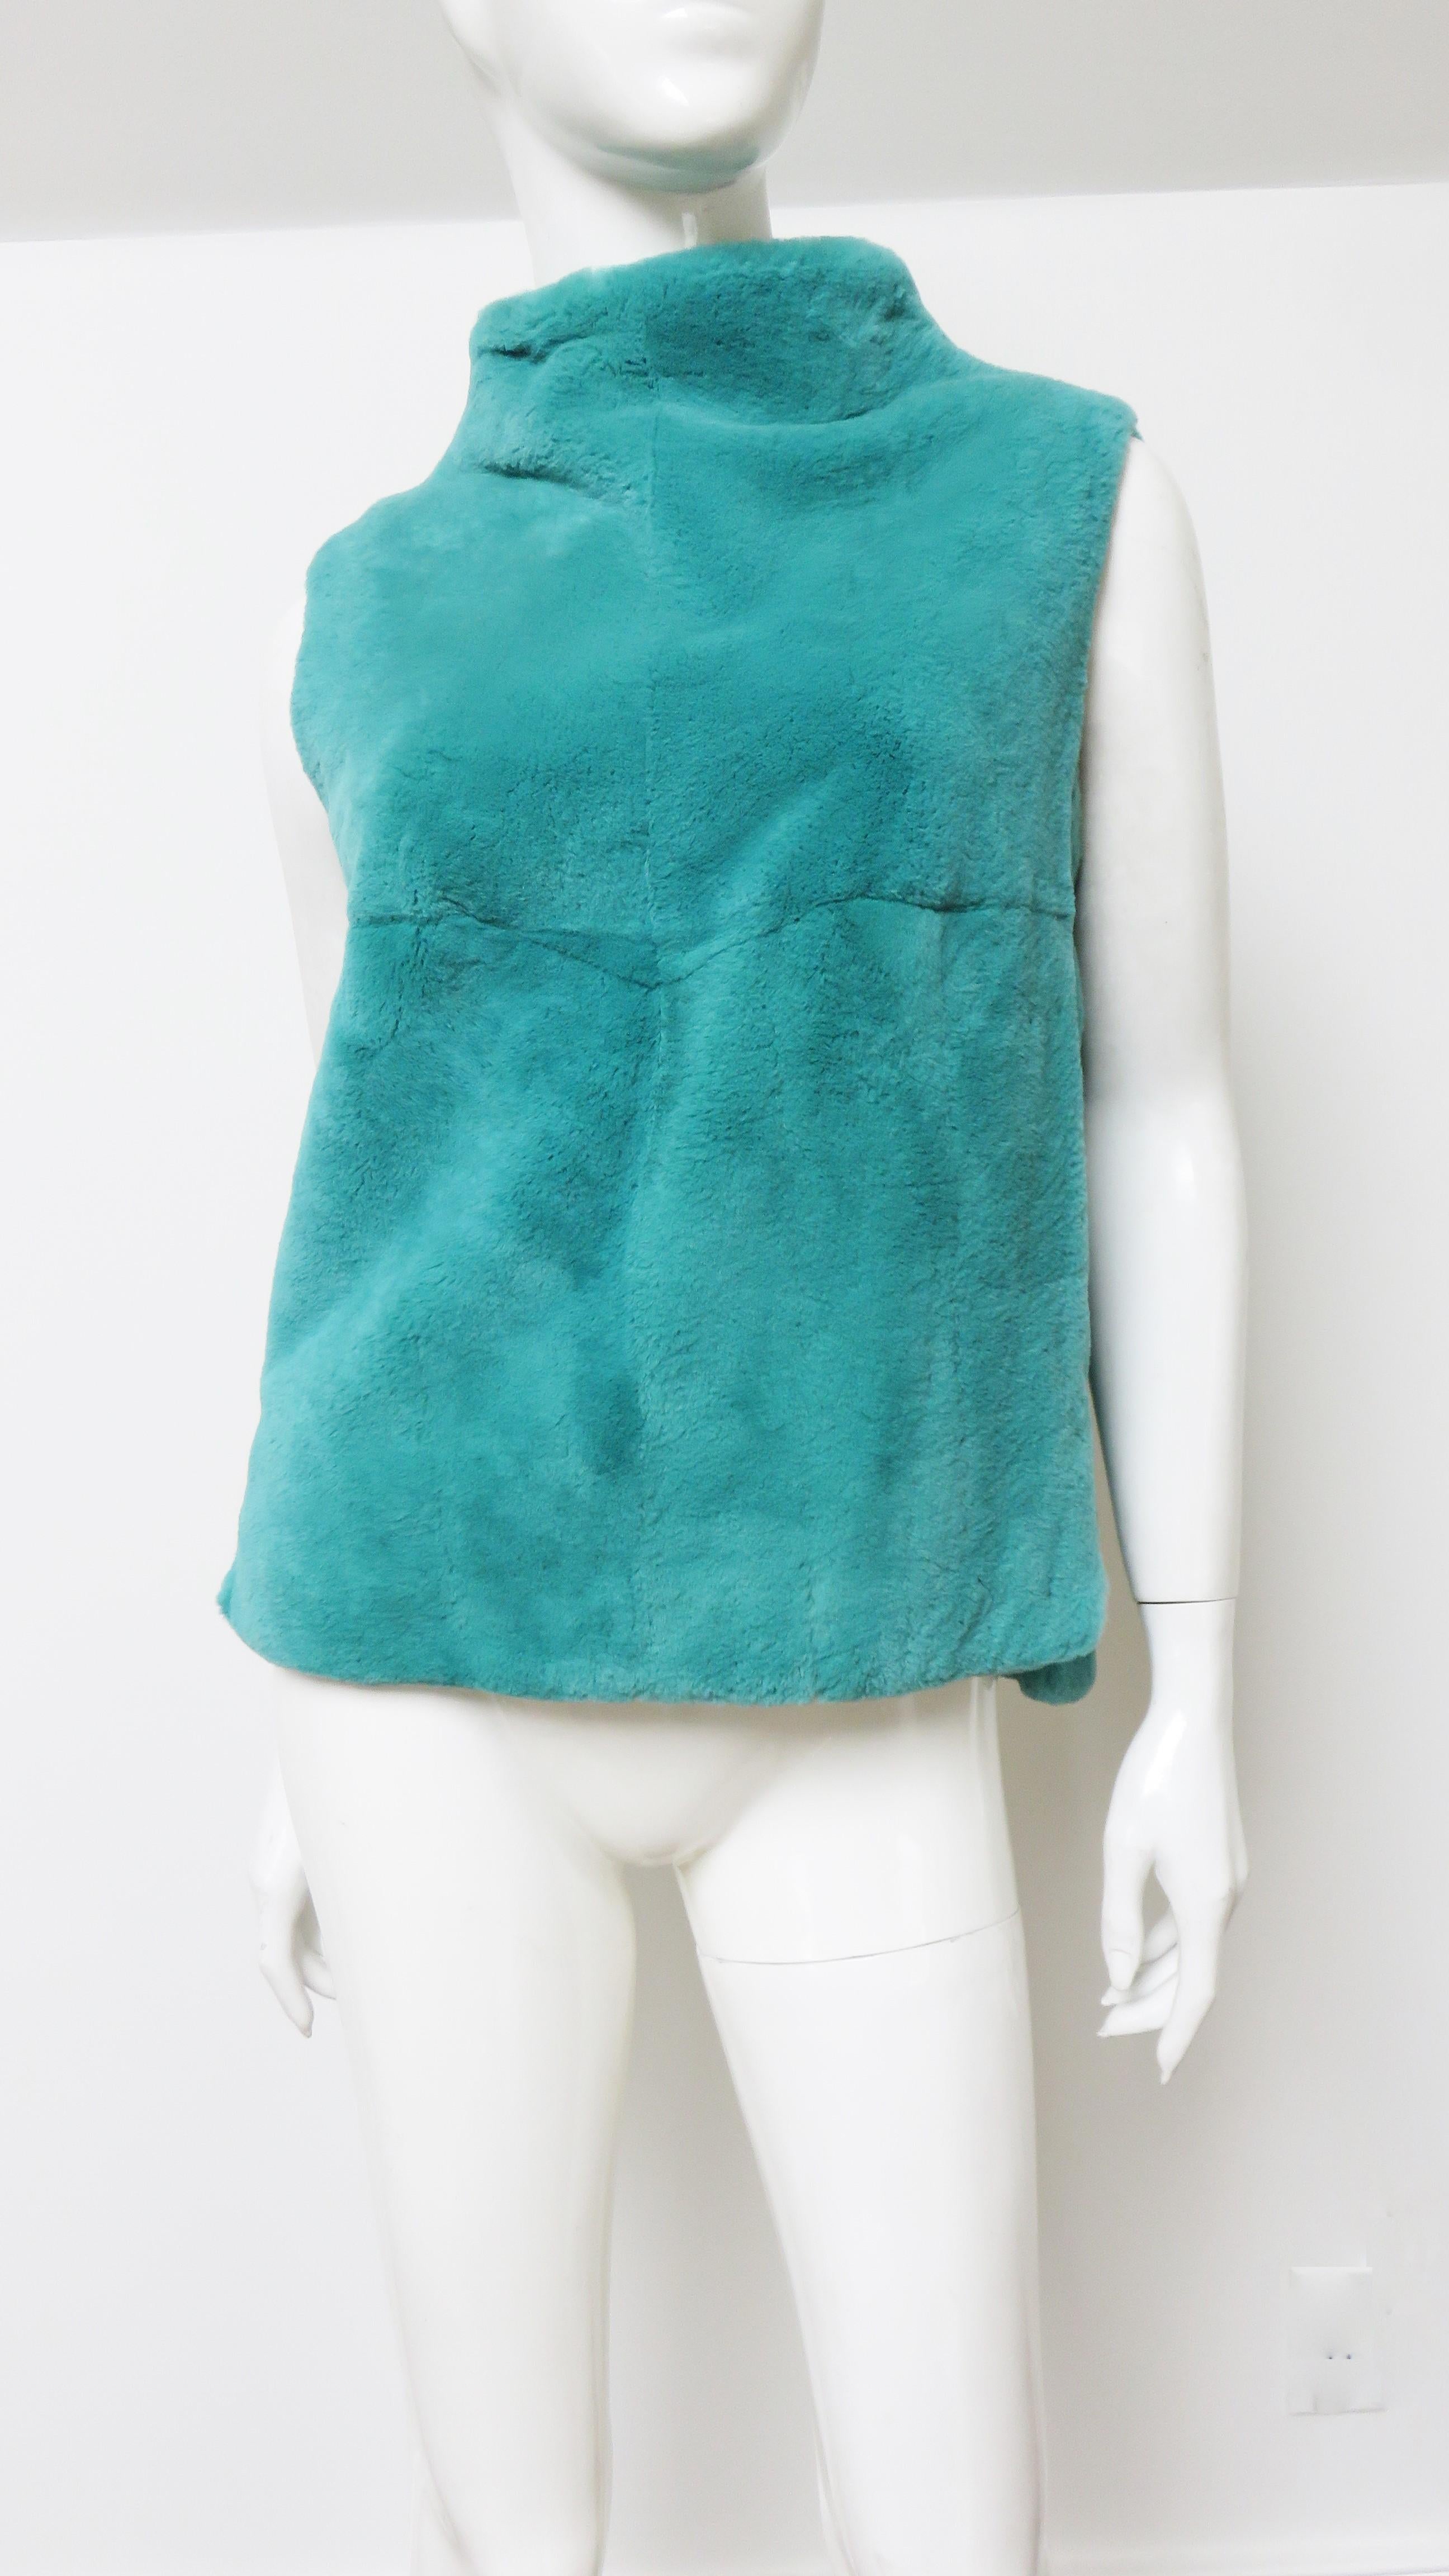 A gorgeous sheared fur vest by Coach. It is sleeveless with a stand up collar and side seam pockets. The back is 1 1/2